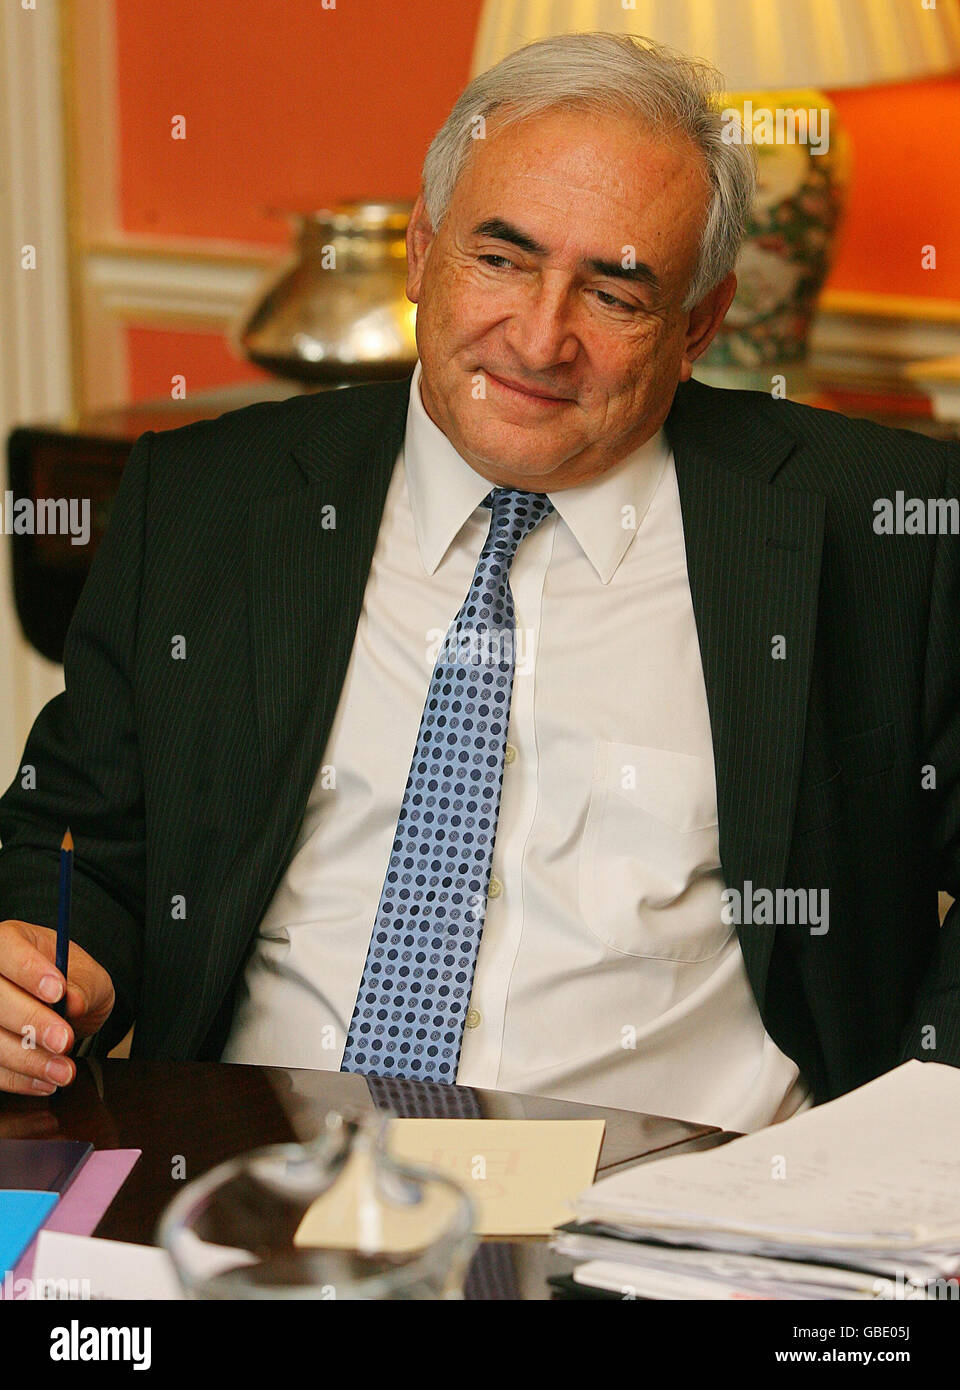 International Monetary Fund chief Dominique Strauss-Kahn attends a meeting with Prime Minister Gordon Brown and Chancellor Alistair Darling at 10 Downing Street, London. Stock Photo